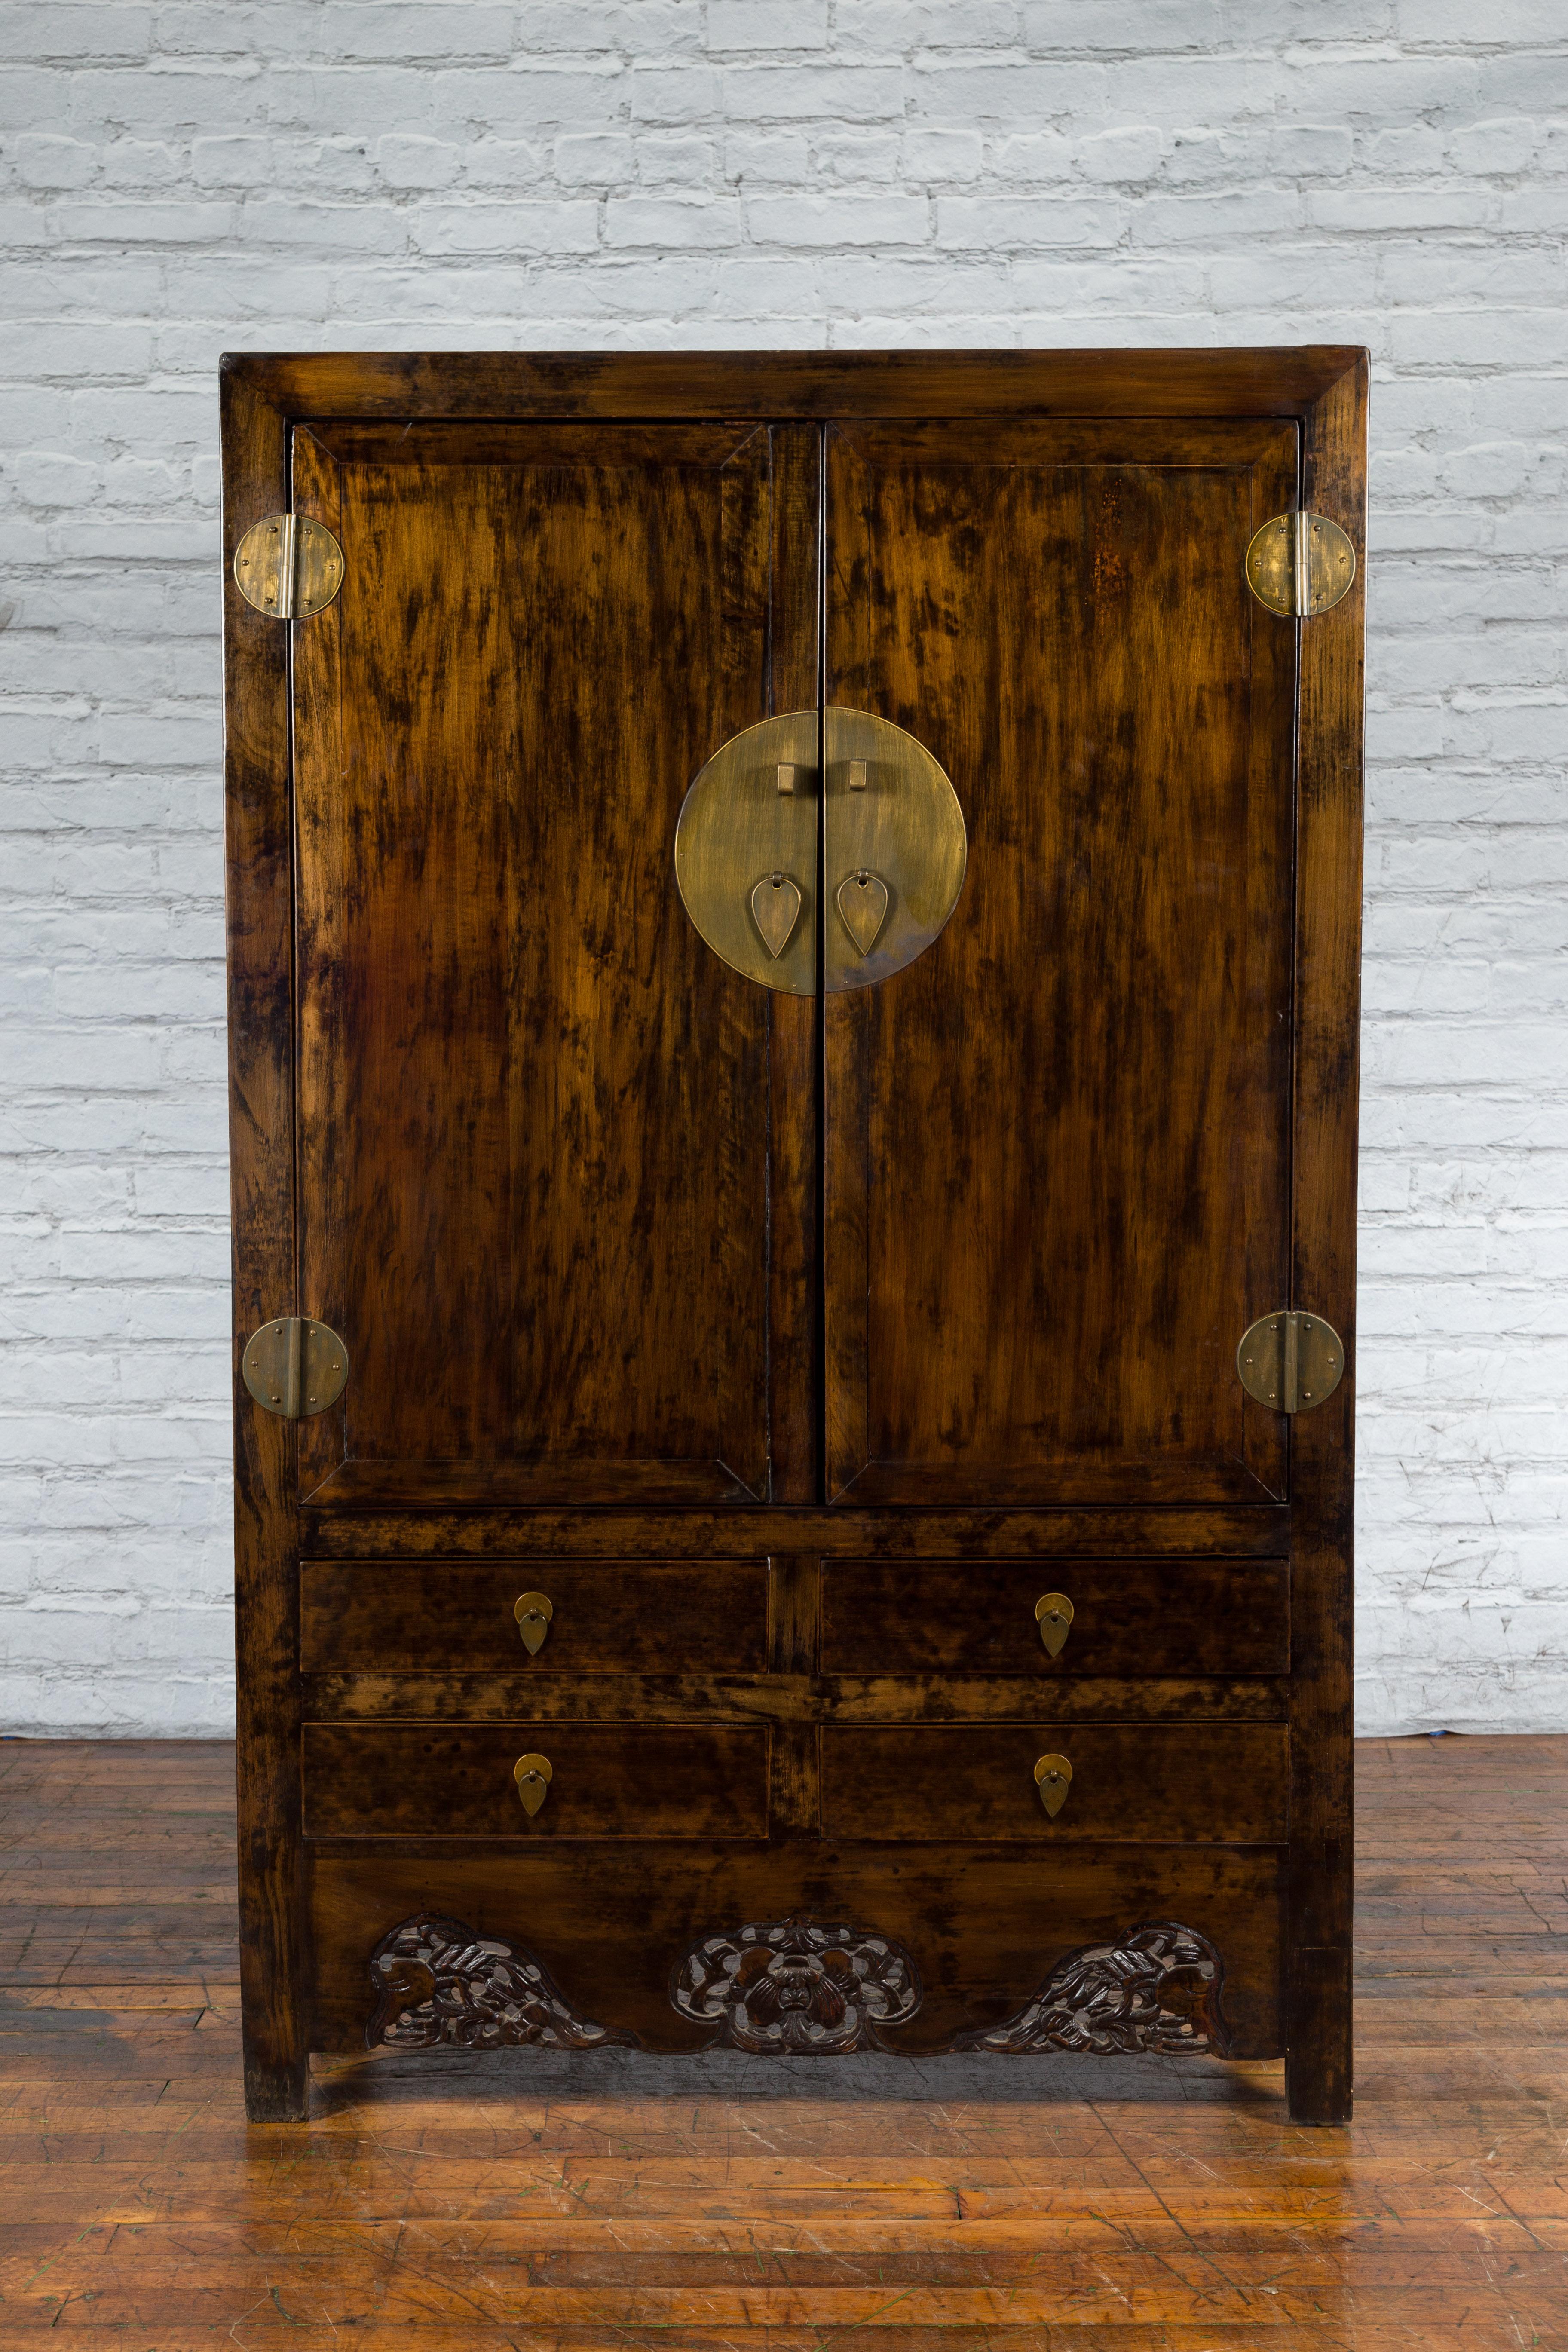 A Chinese Qing Dynasty period wooden armoire from the 19th century with carved skirt, brown patina and large brass medallion. Created in China during the Qing Dynasty in the 19th century, this wooden armoire features a linear silhouette perfectly